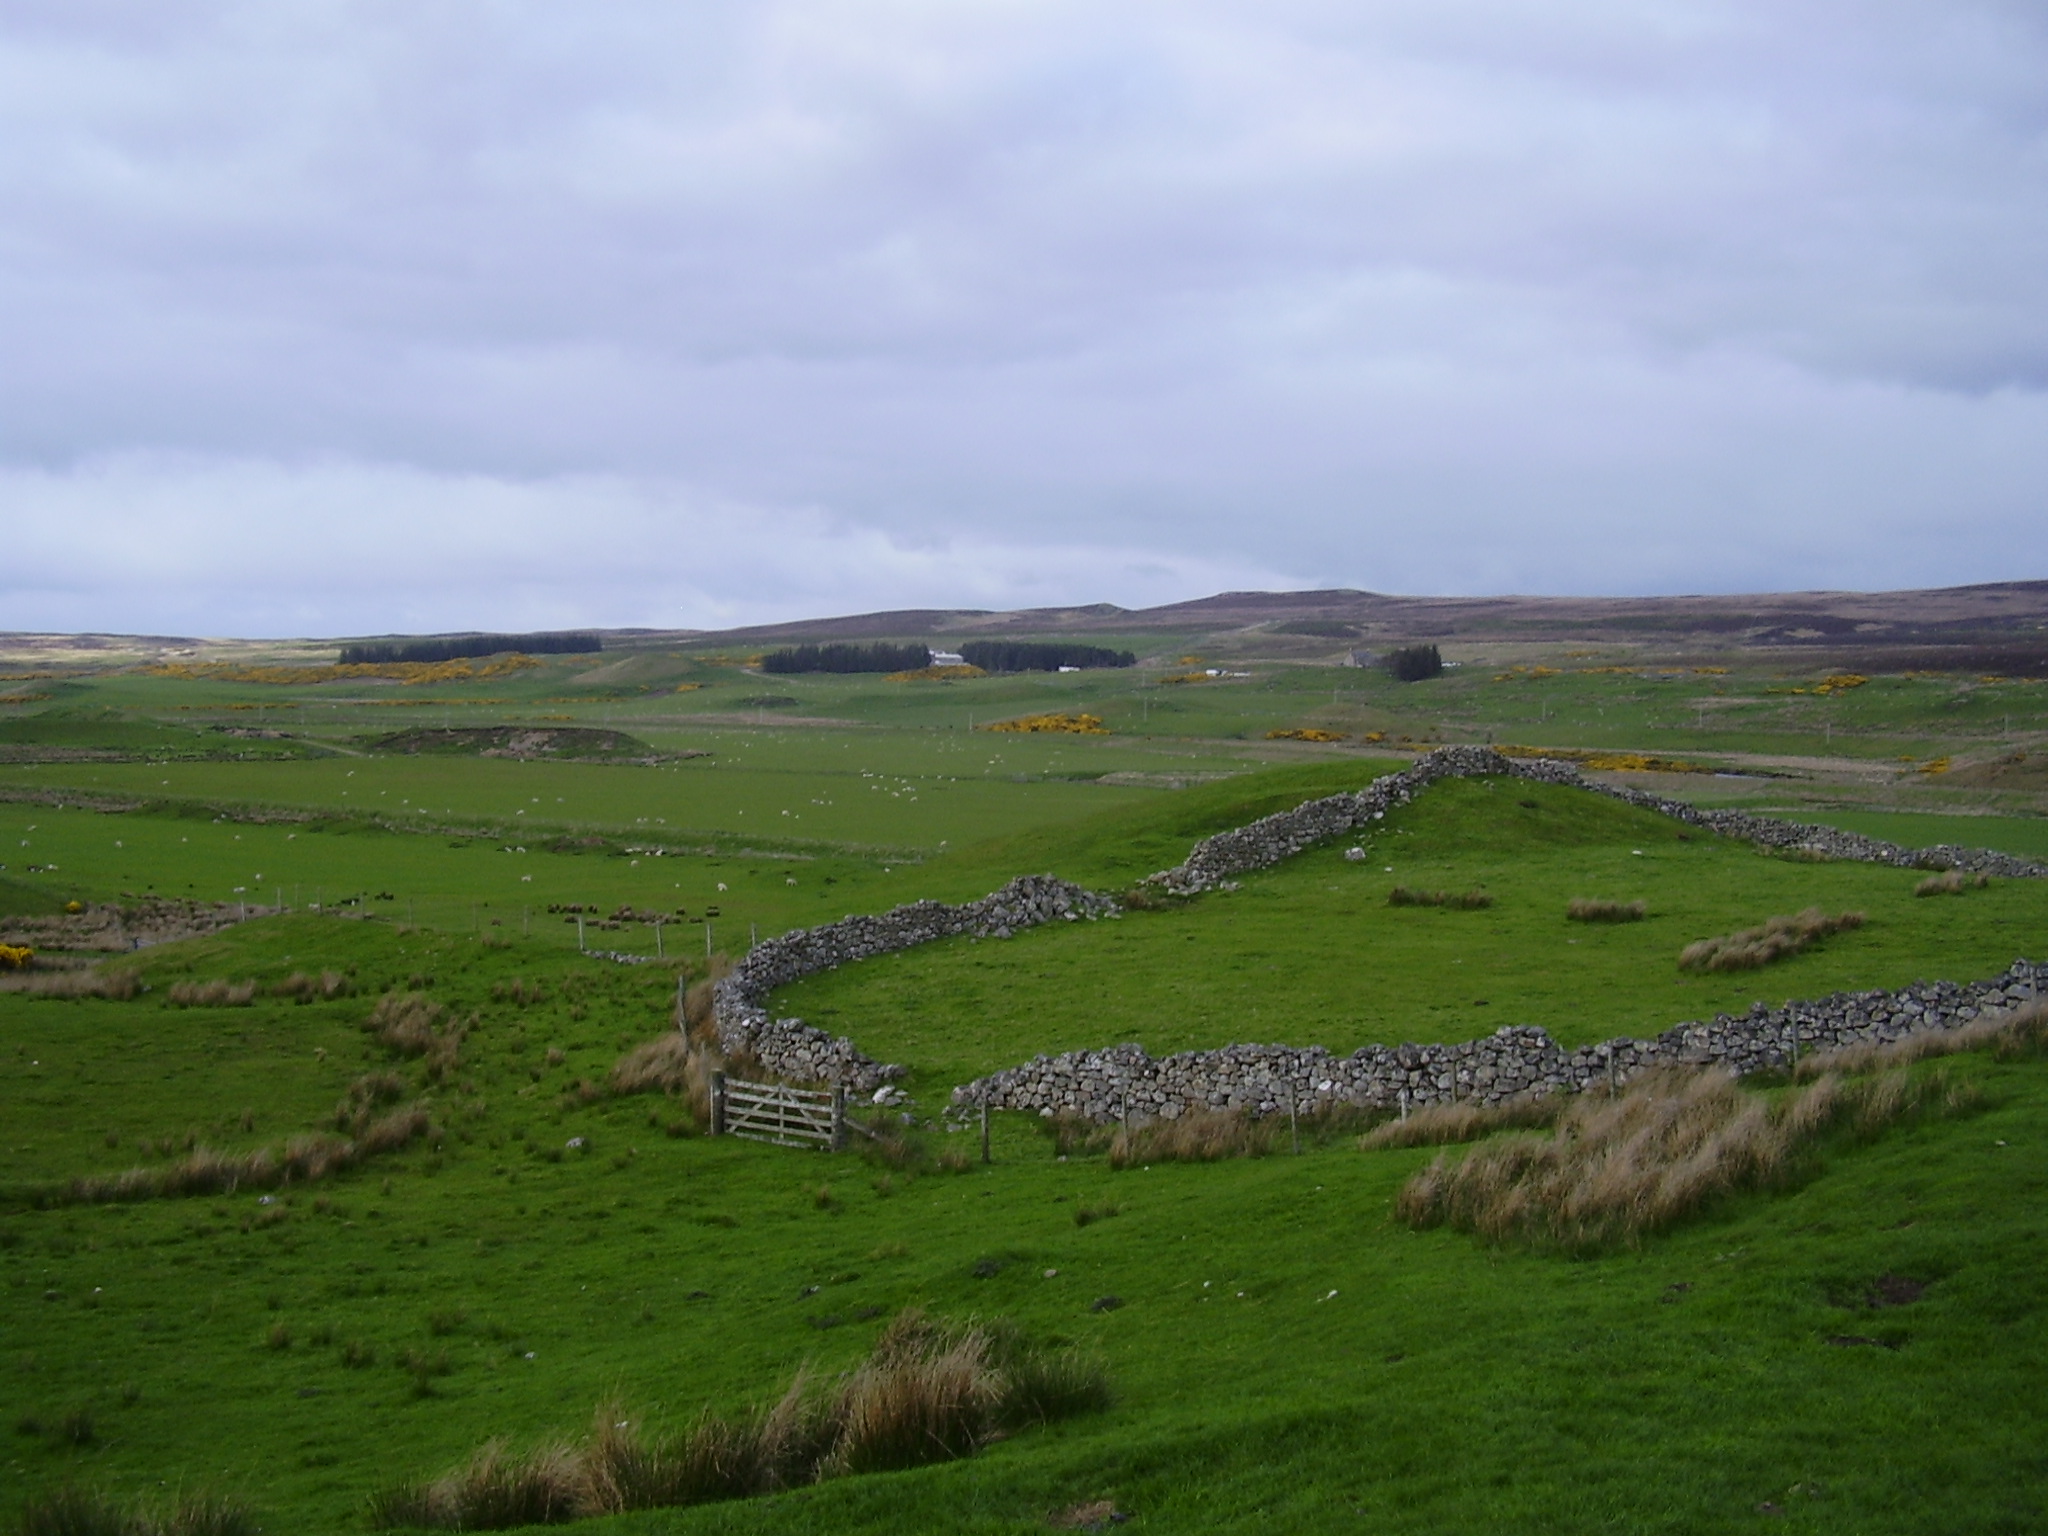 Strath Halladale filled with sheep